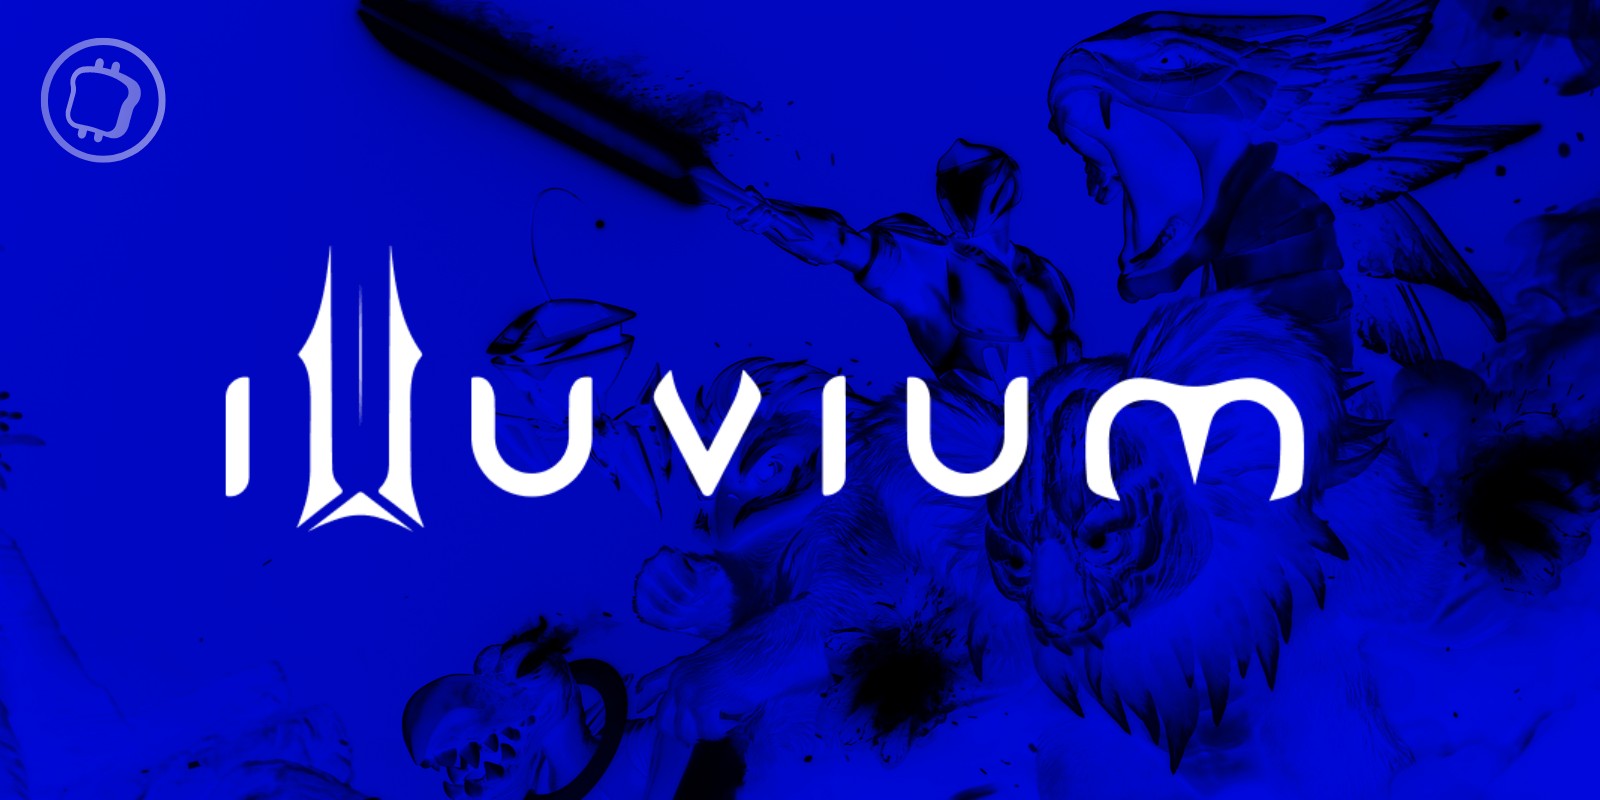 Web3 Illuvium is now available